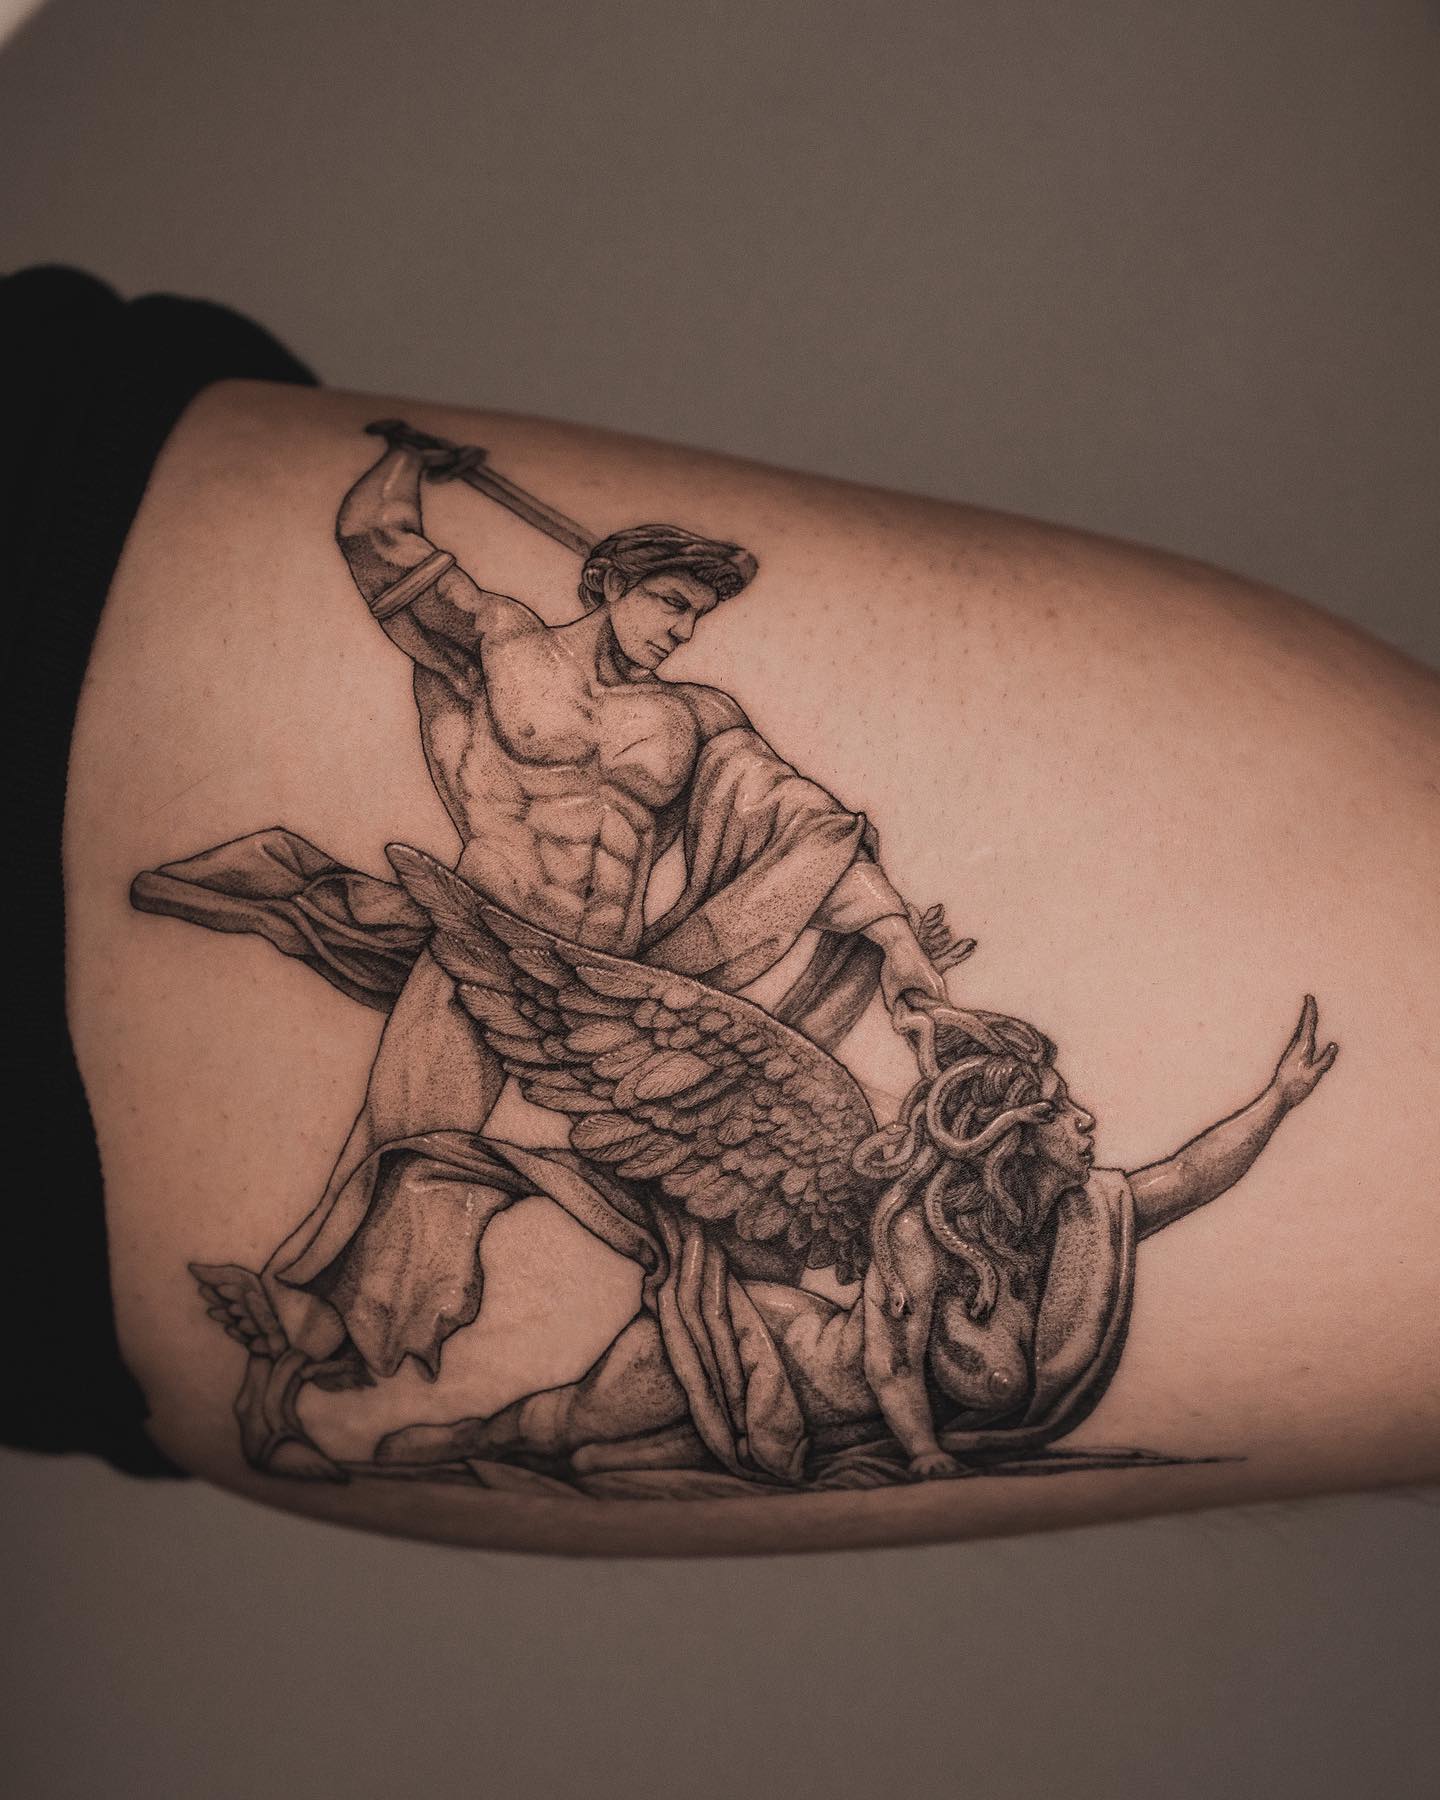 Poor Medusa is a victim of Perseus in this digital sculpture based tattoo. Although the meaning behind it can be sad since Medusa is a protector, it is not possible to ignore the skill of the tattooist.